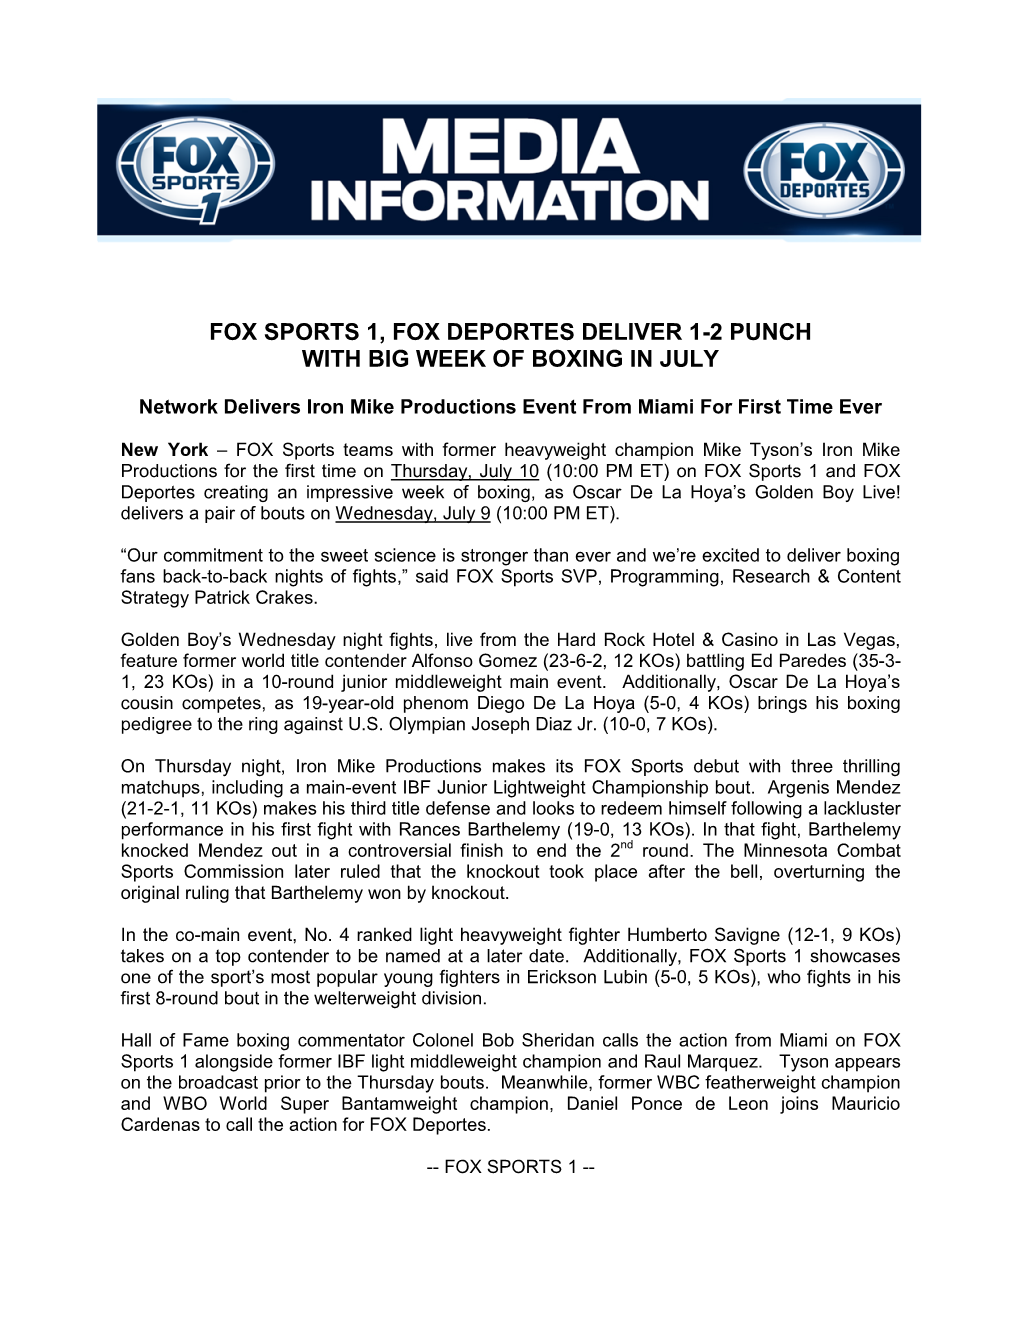 Fox Sports 1, Fox Deportes Deliver 1-2 Punch with Big Week of Boxing in July